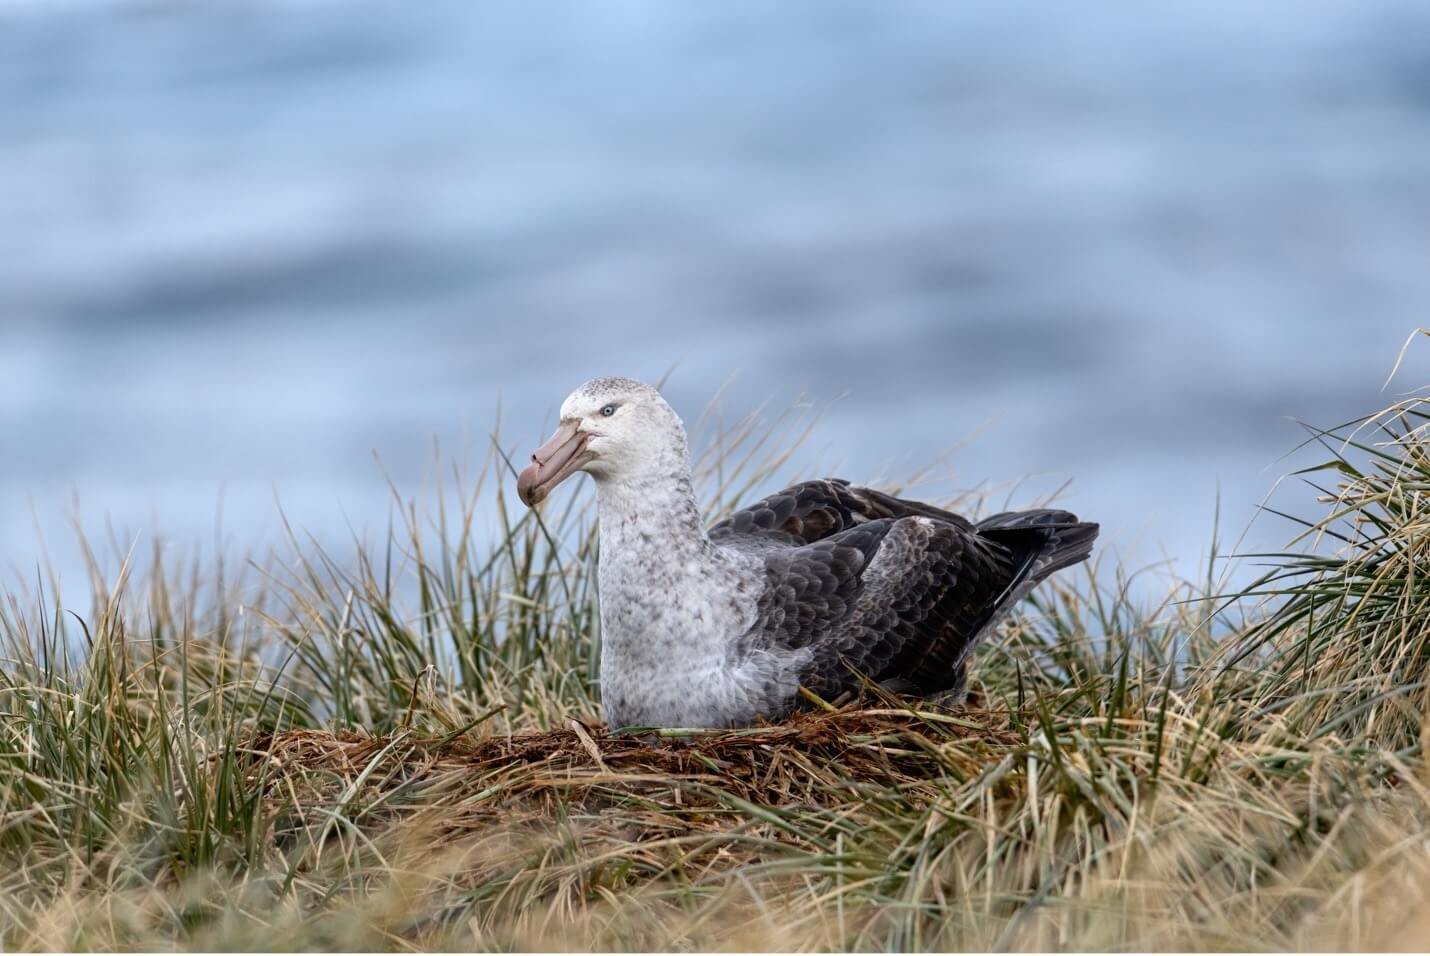 South Georgia Island Albatross © 2019 Debbie McCulliss. All Rights Reserved.